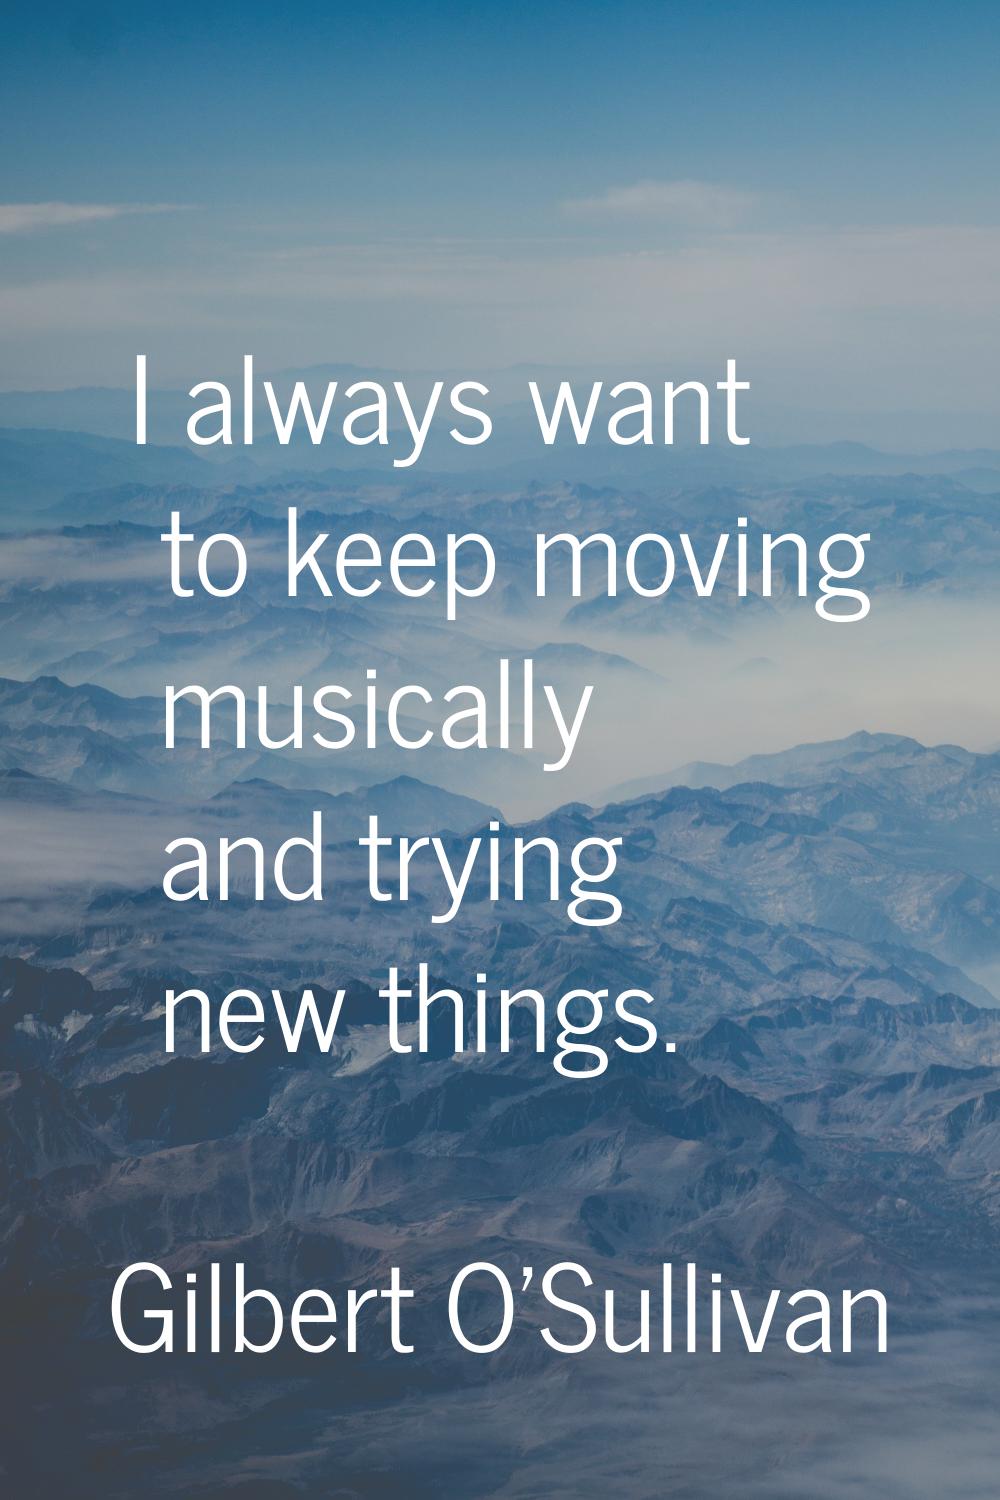 I always want to keep moving musically and trying new things.